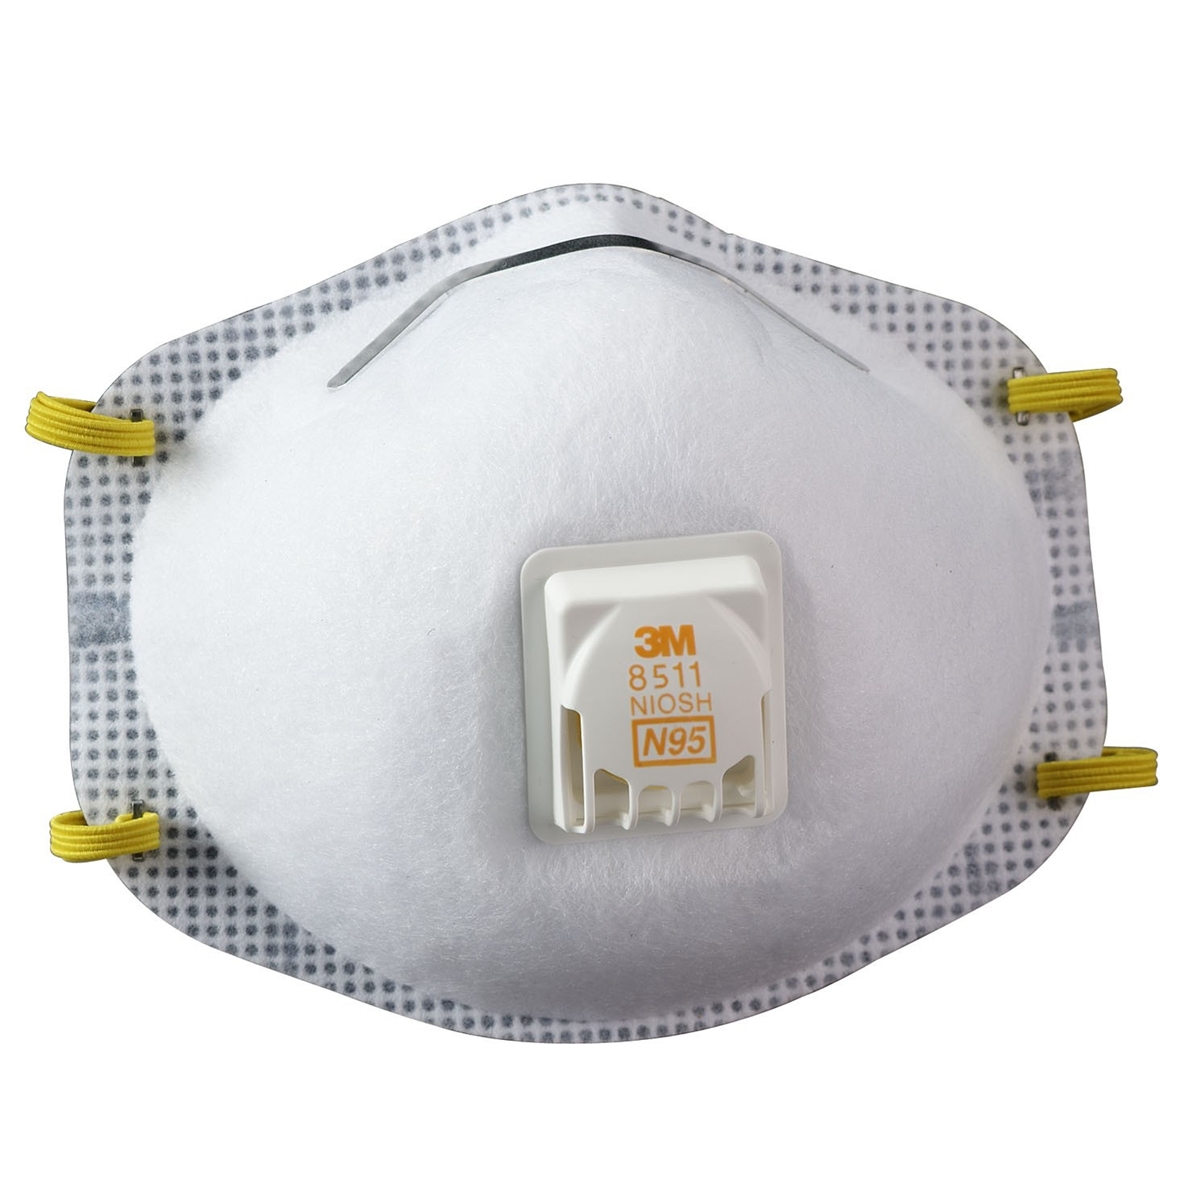 3M #8511 N95 Dust Mask With Exhalation Valve